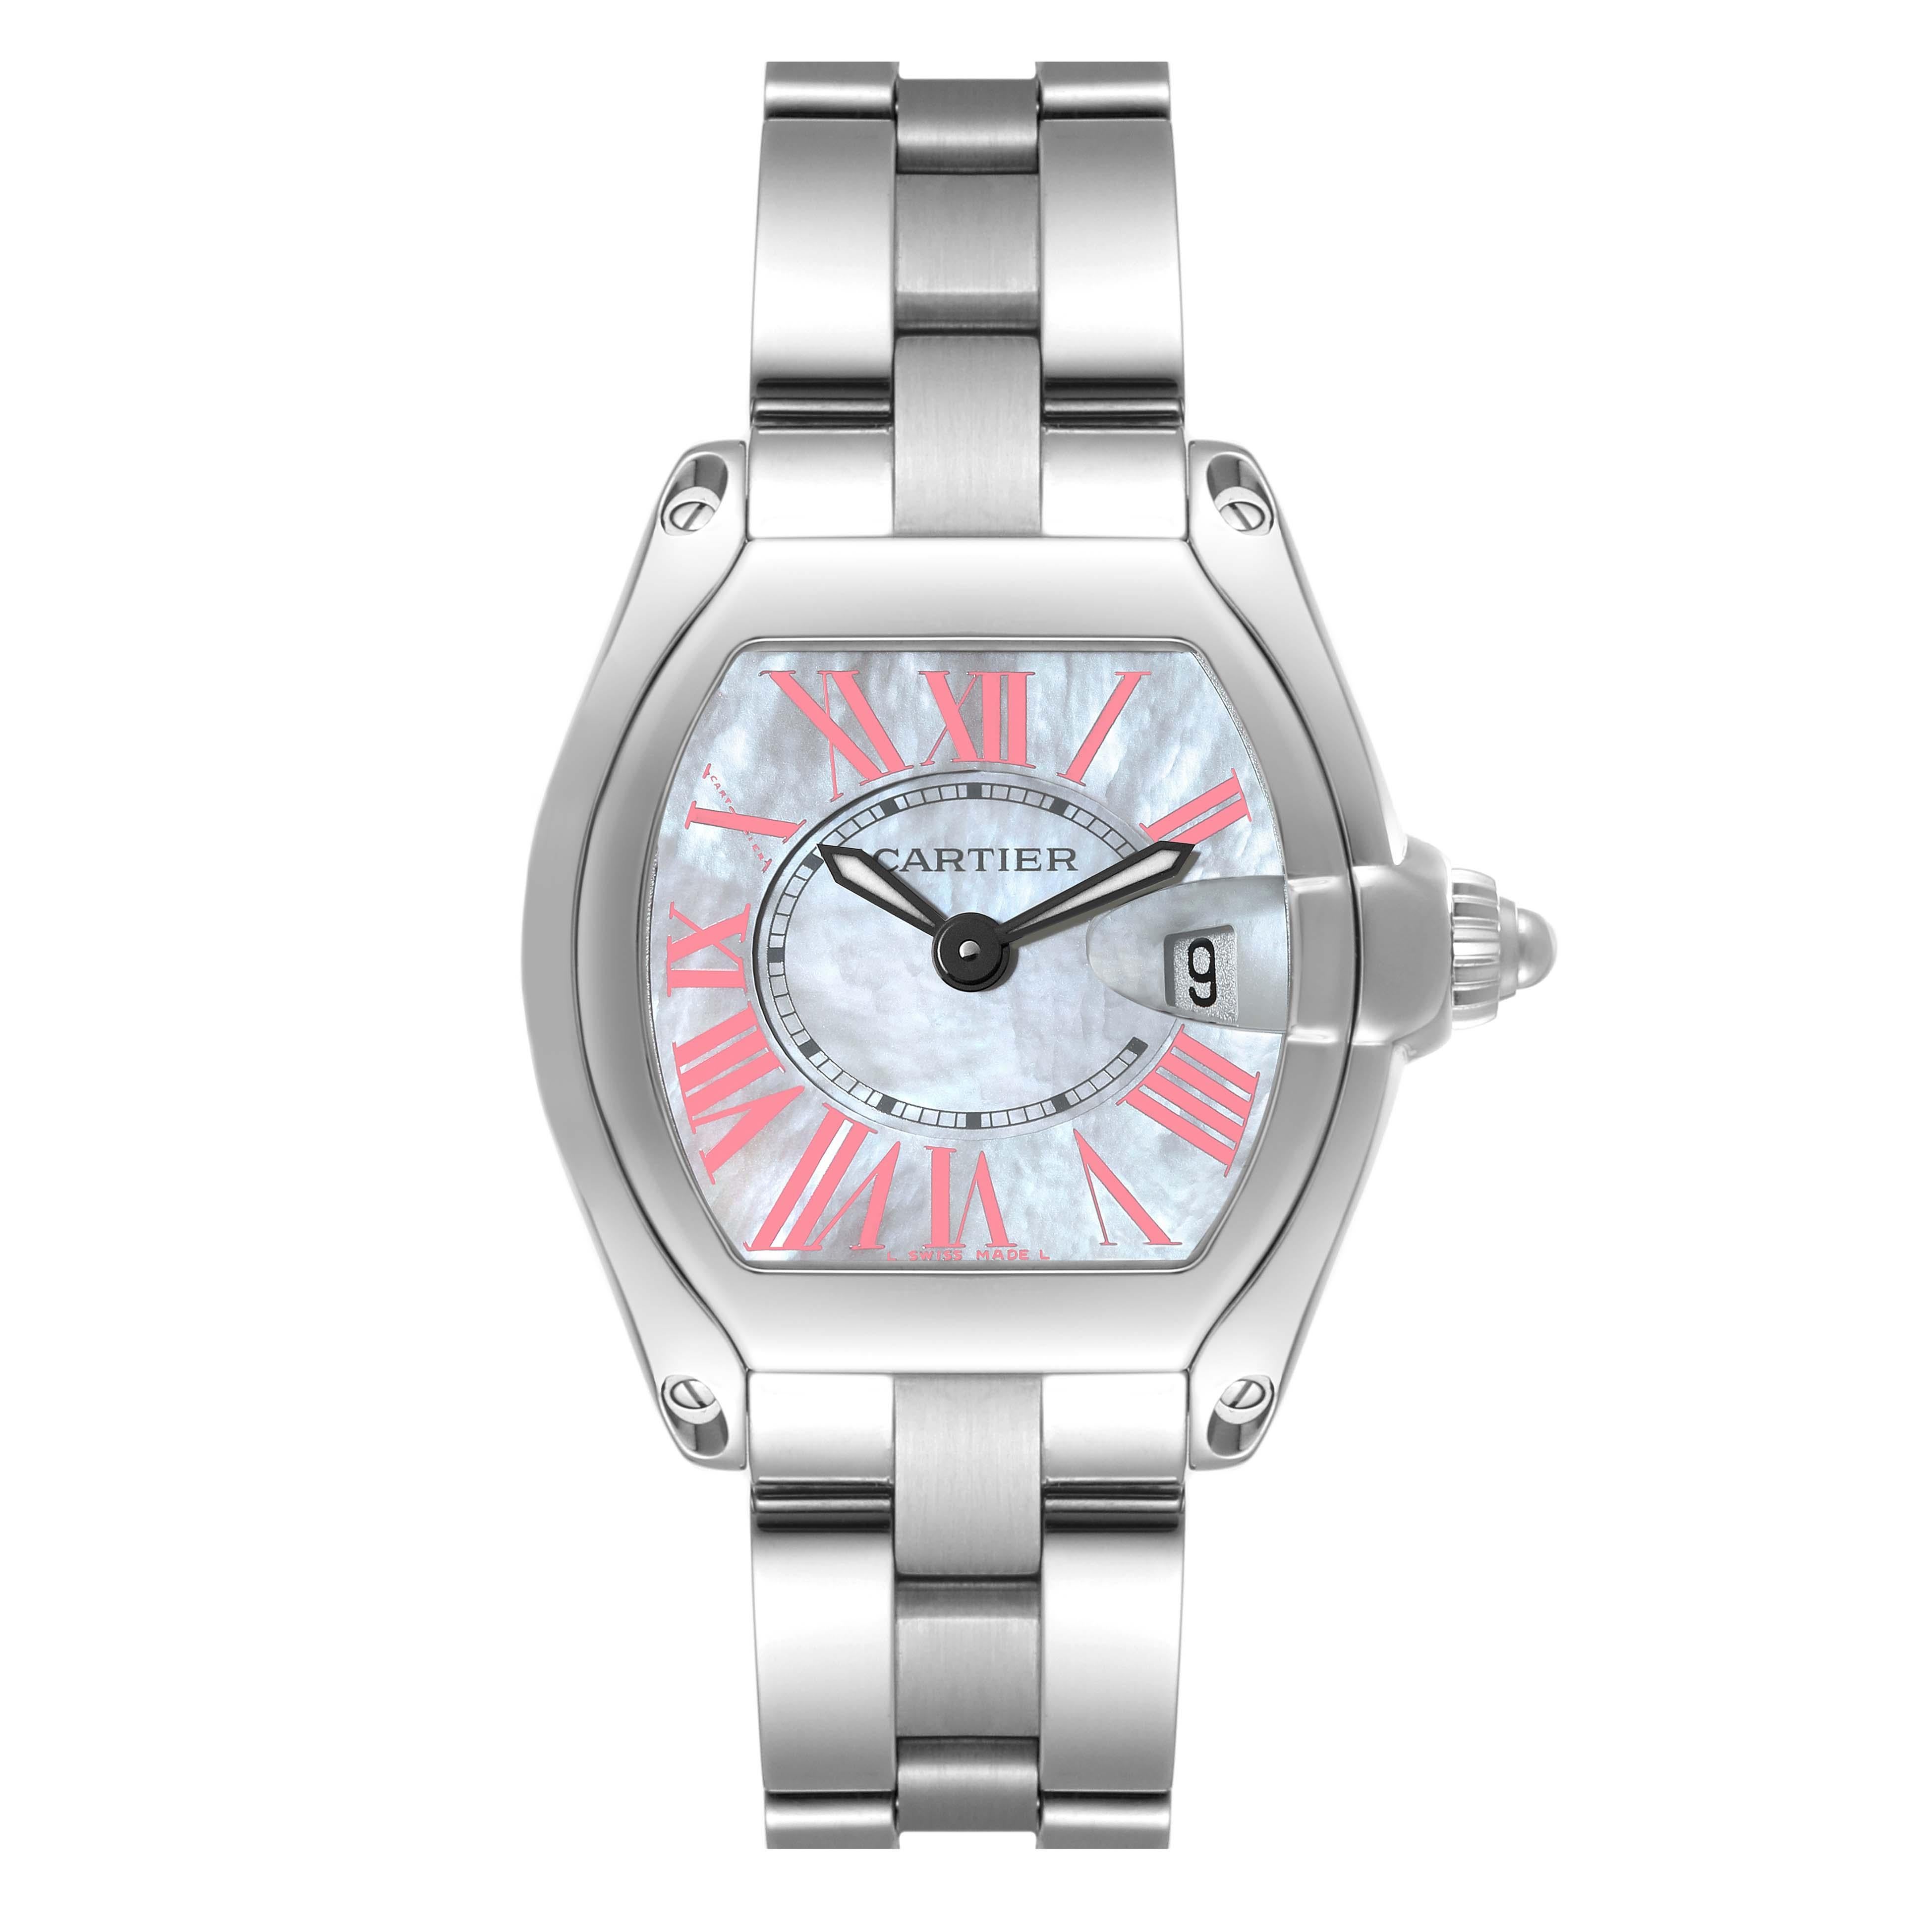 Cartier Roadster Mother of Pearl Dial Steel Ladies Watch W6206006 Box Papers. Swiss quartz movement calibre 688. Stainless steel tonneau shaped case 36 x 30 mm. . Scratch resistant sapphire crystal with cyclops magnifier. Mother of pearl dial with